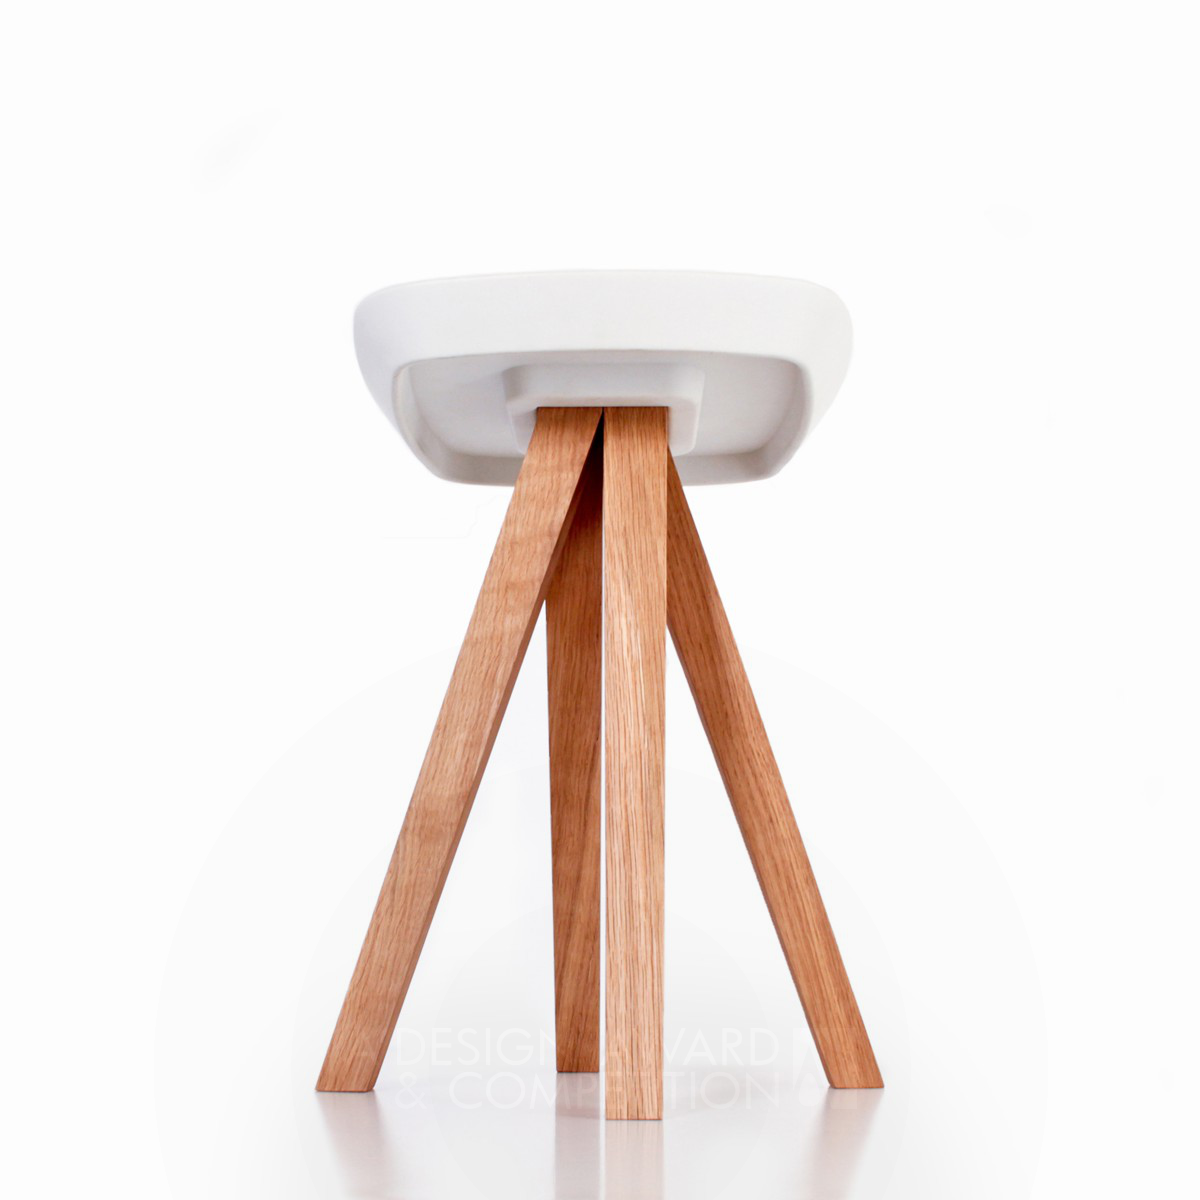 Franck Divay wins Silver at the prestigious A' Furniture Design Award with Ydin Stool Stool.